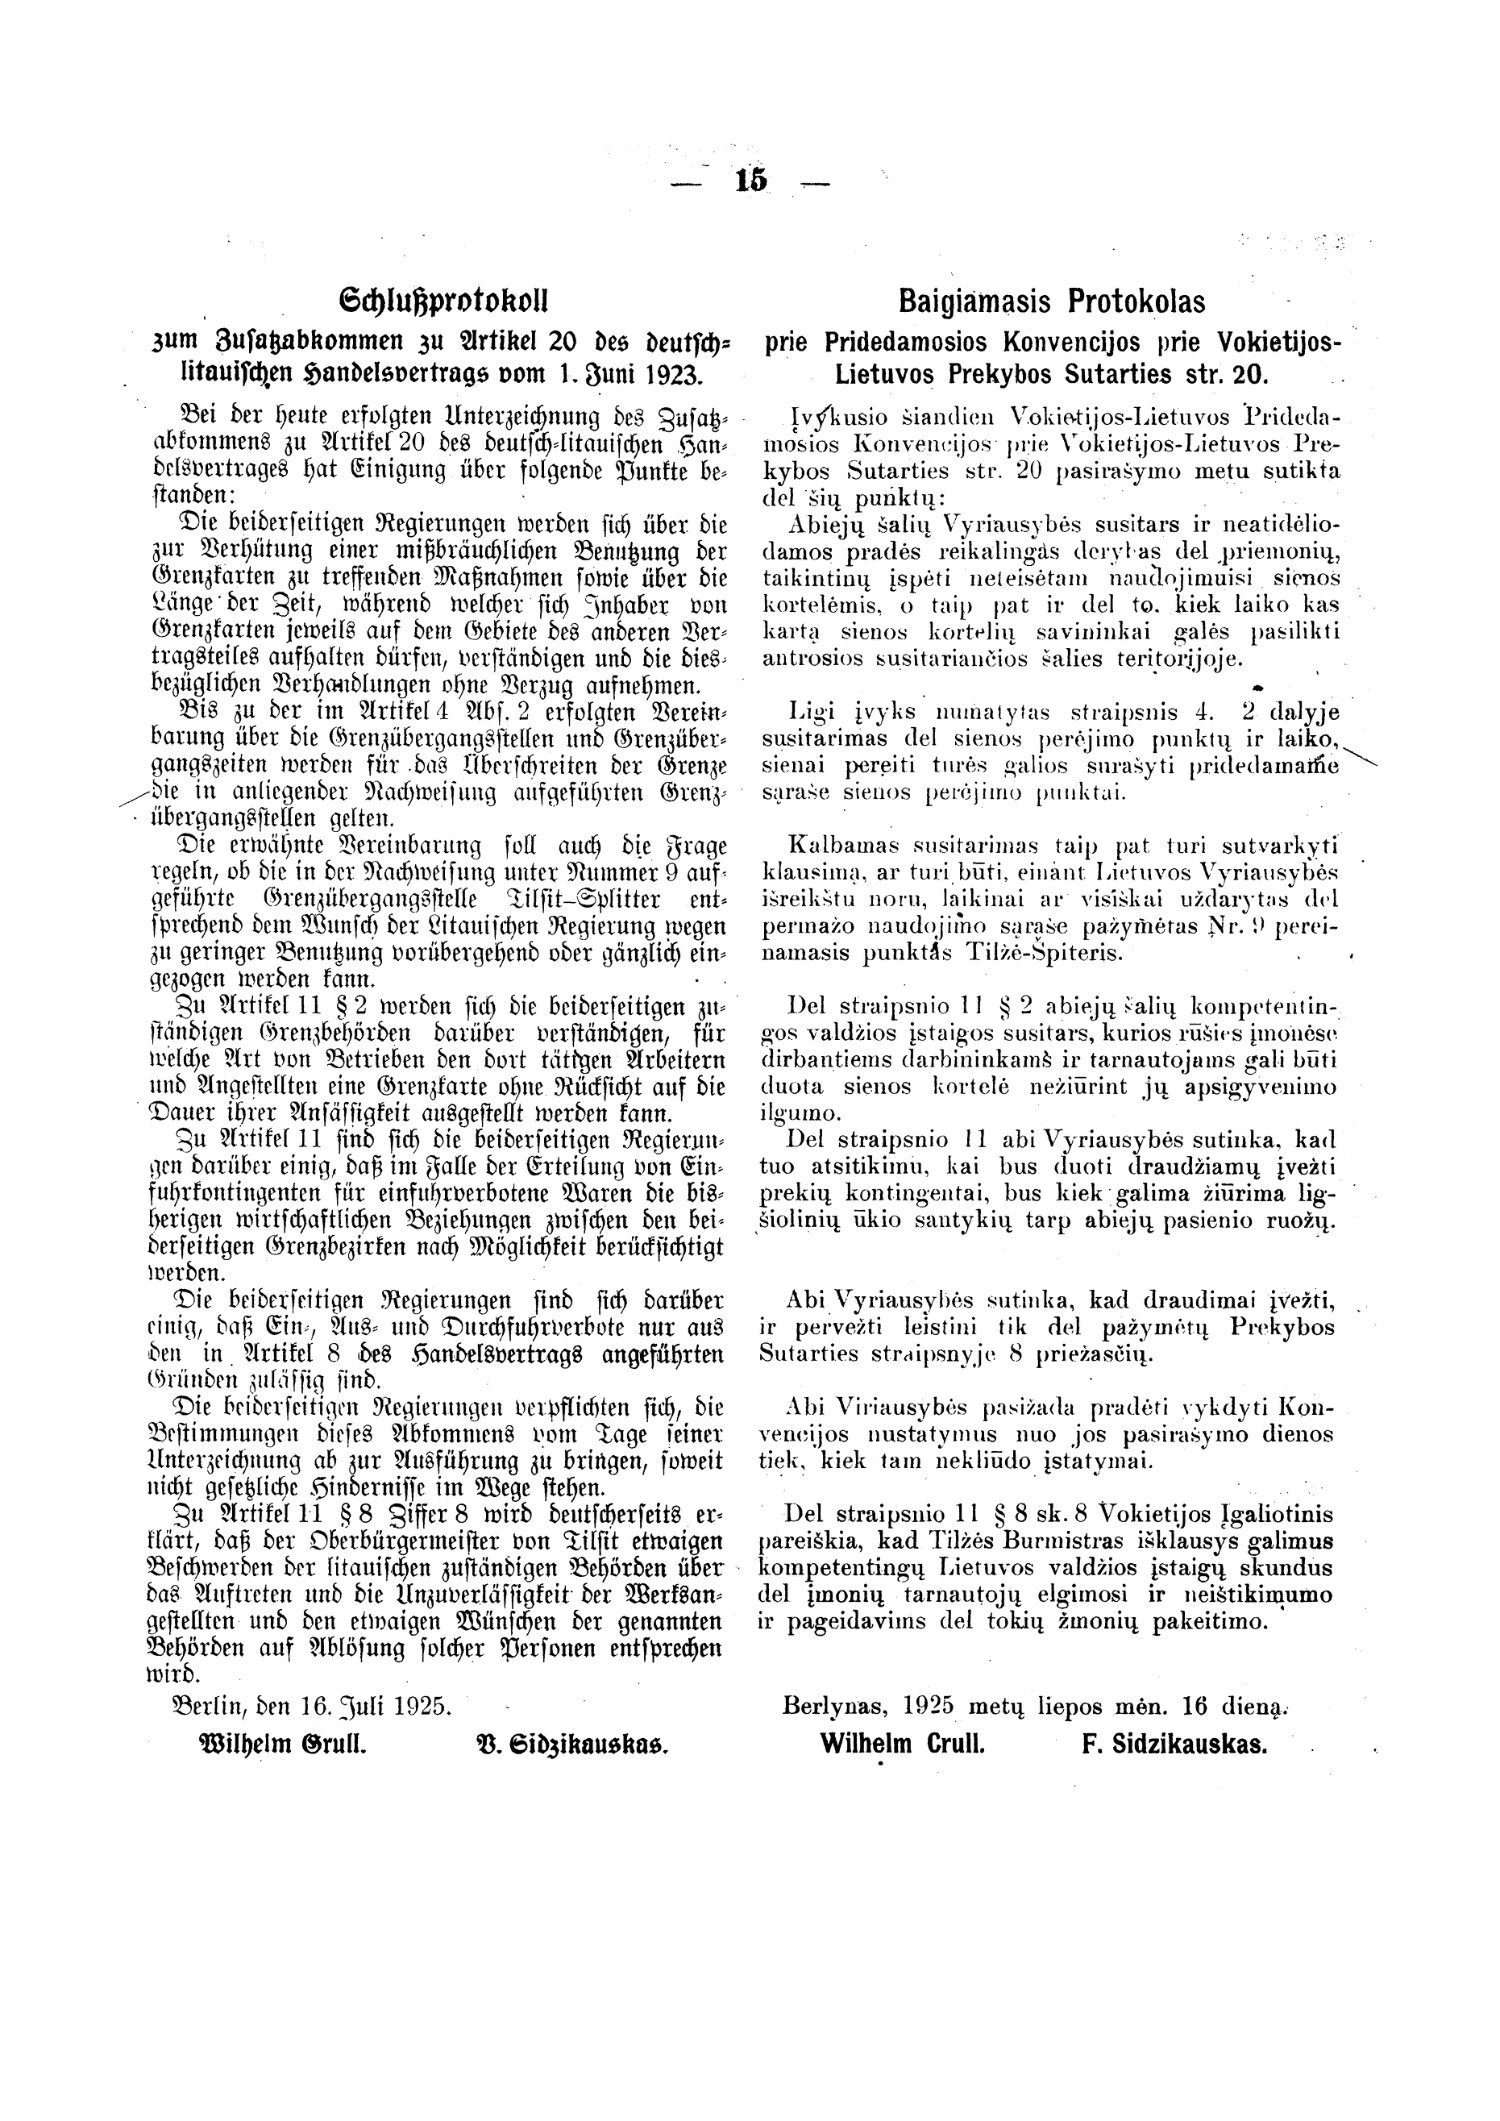 Scan of page 15